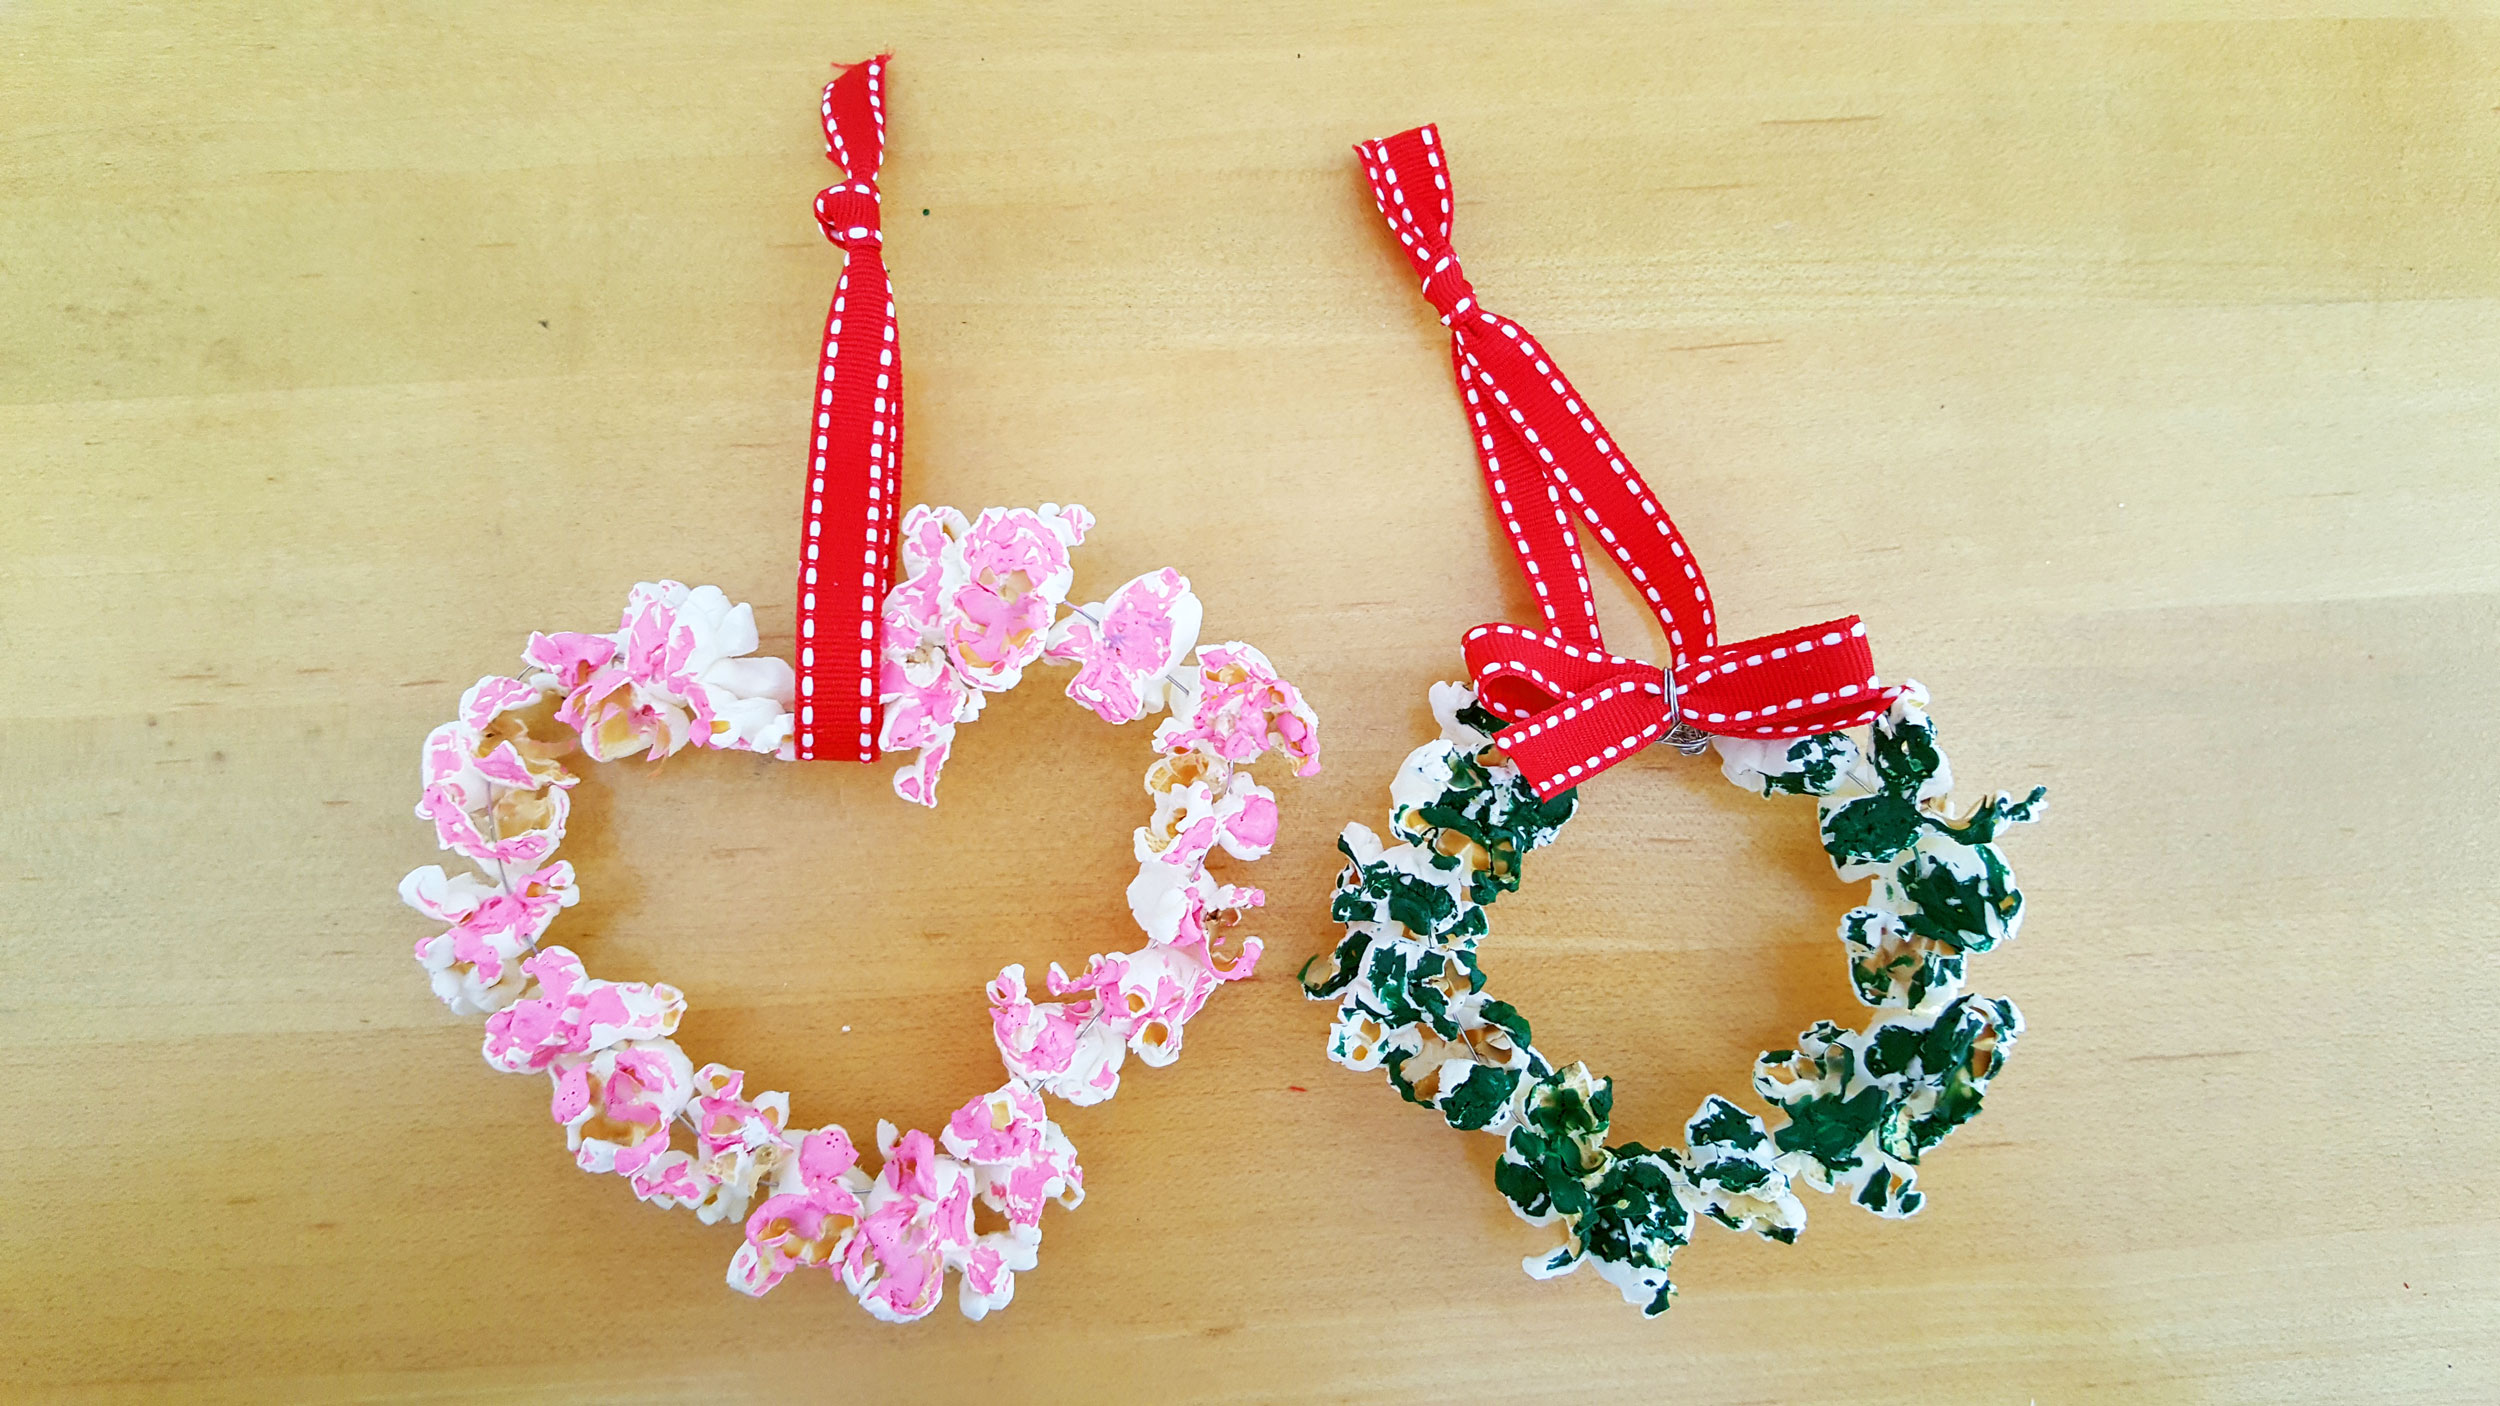 Two DIY popcorn ornaments, one shaped as a heart and the other a wreath. | OrnamentShop.com